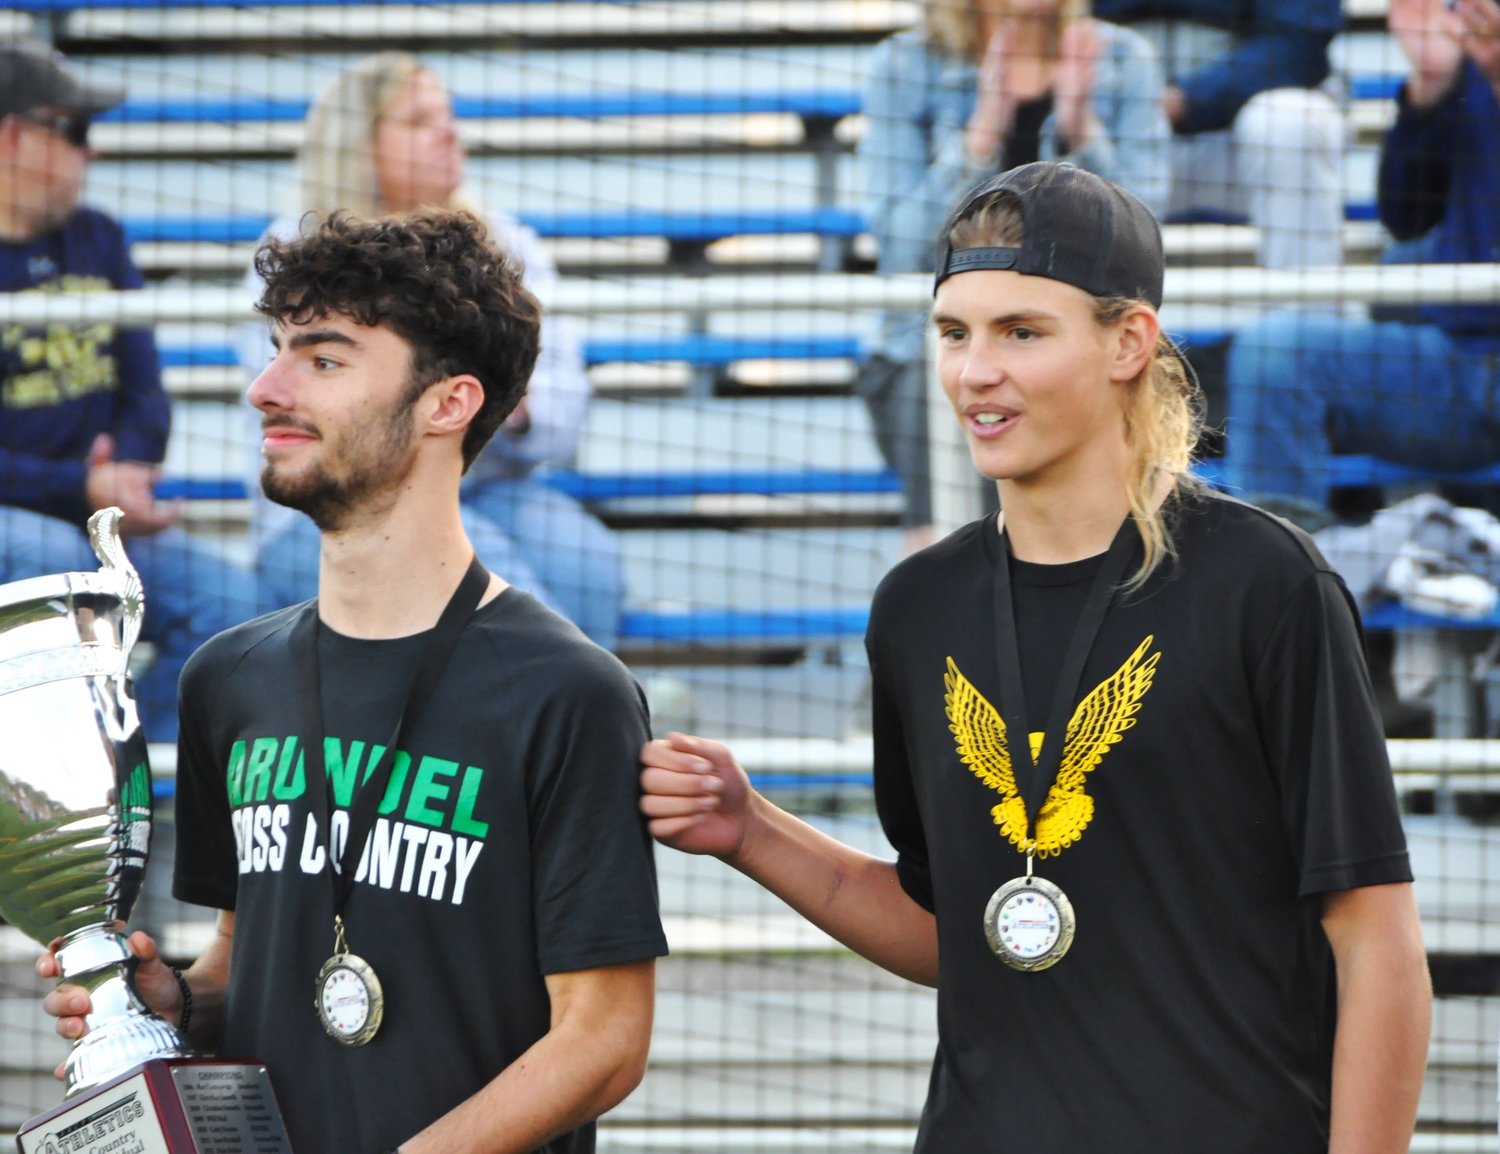 Severna Park High School junior Taylor Jarvis (right) congratulated Arundel High School junior Zaiden Lane at the county cross country championship award ceremony at South River High School on October 26. Lane was the top finisher in the boys race with a time of 16:34.0. Jarvis finished in second place with a time of 16:39.8.